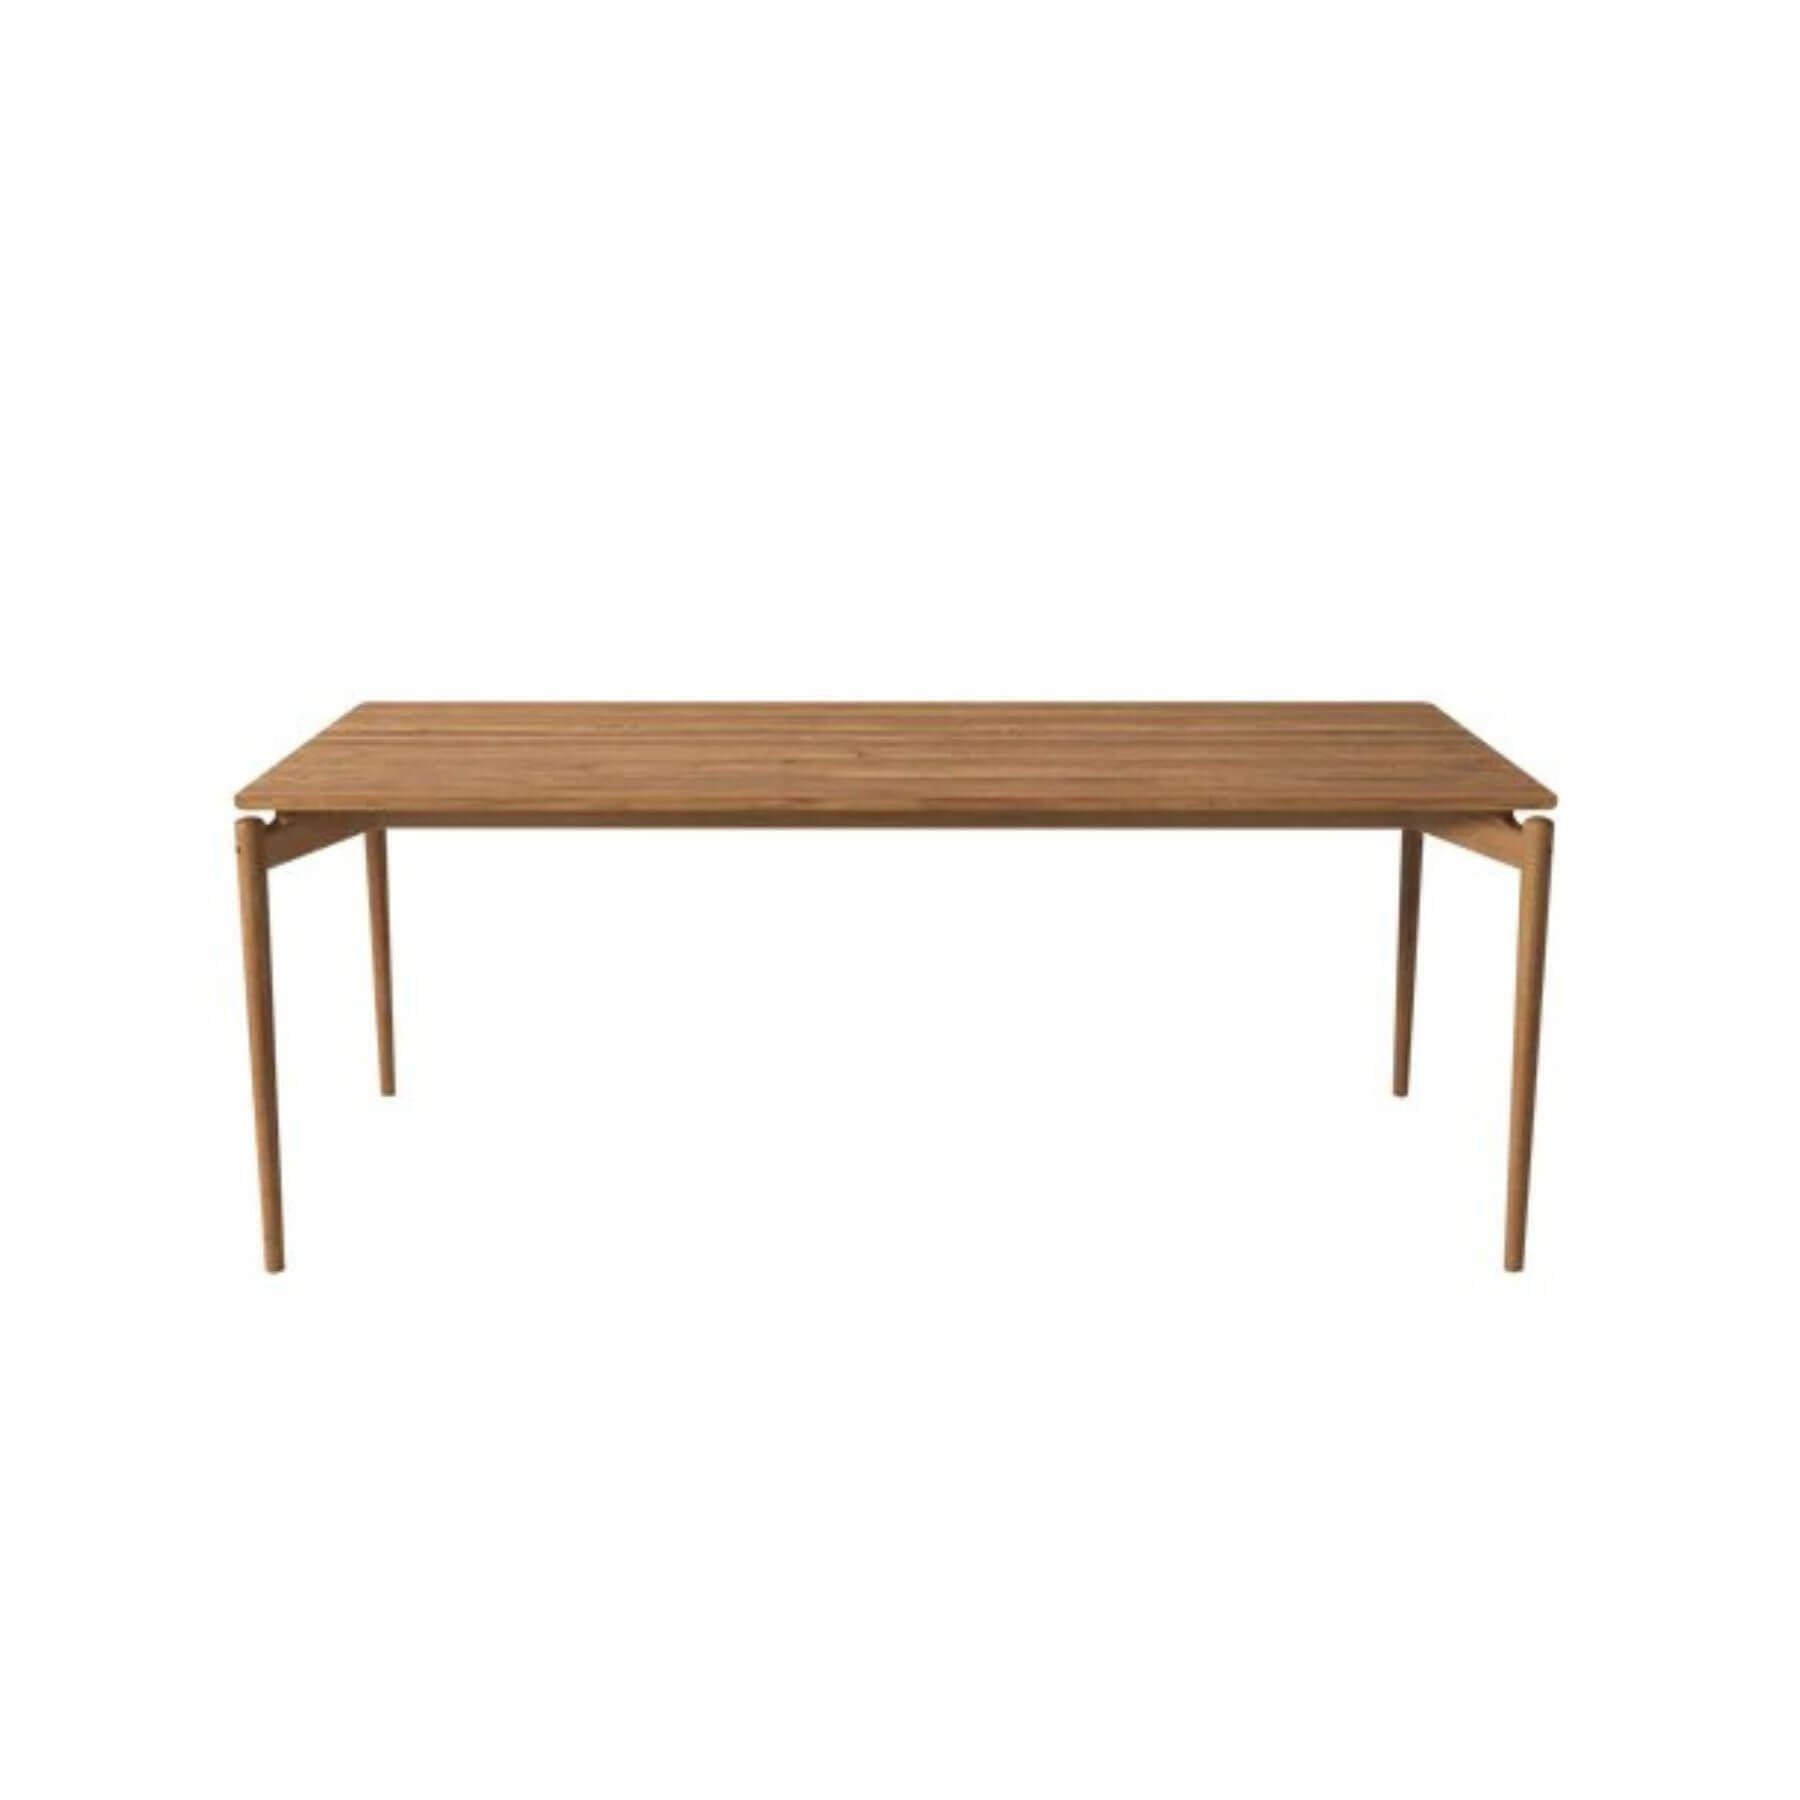 Bruunmunch Pure Dining Table Length 190 Oak Natural Oil Light Wood Designer Furniture From Holloways Of Ludlow